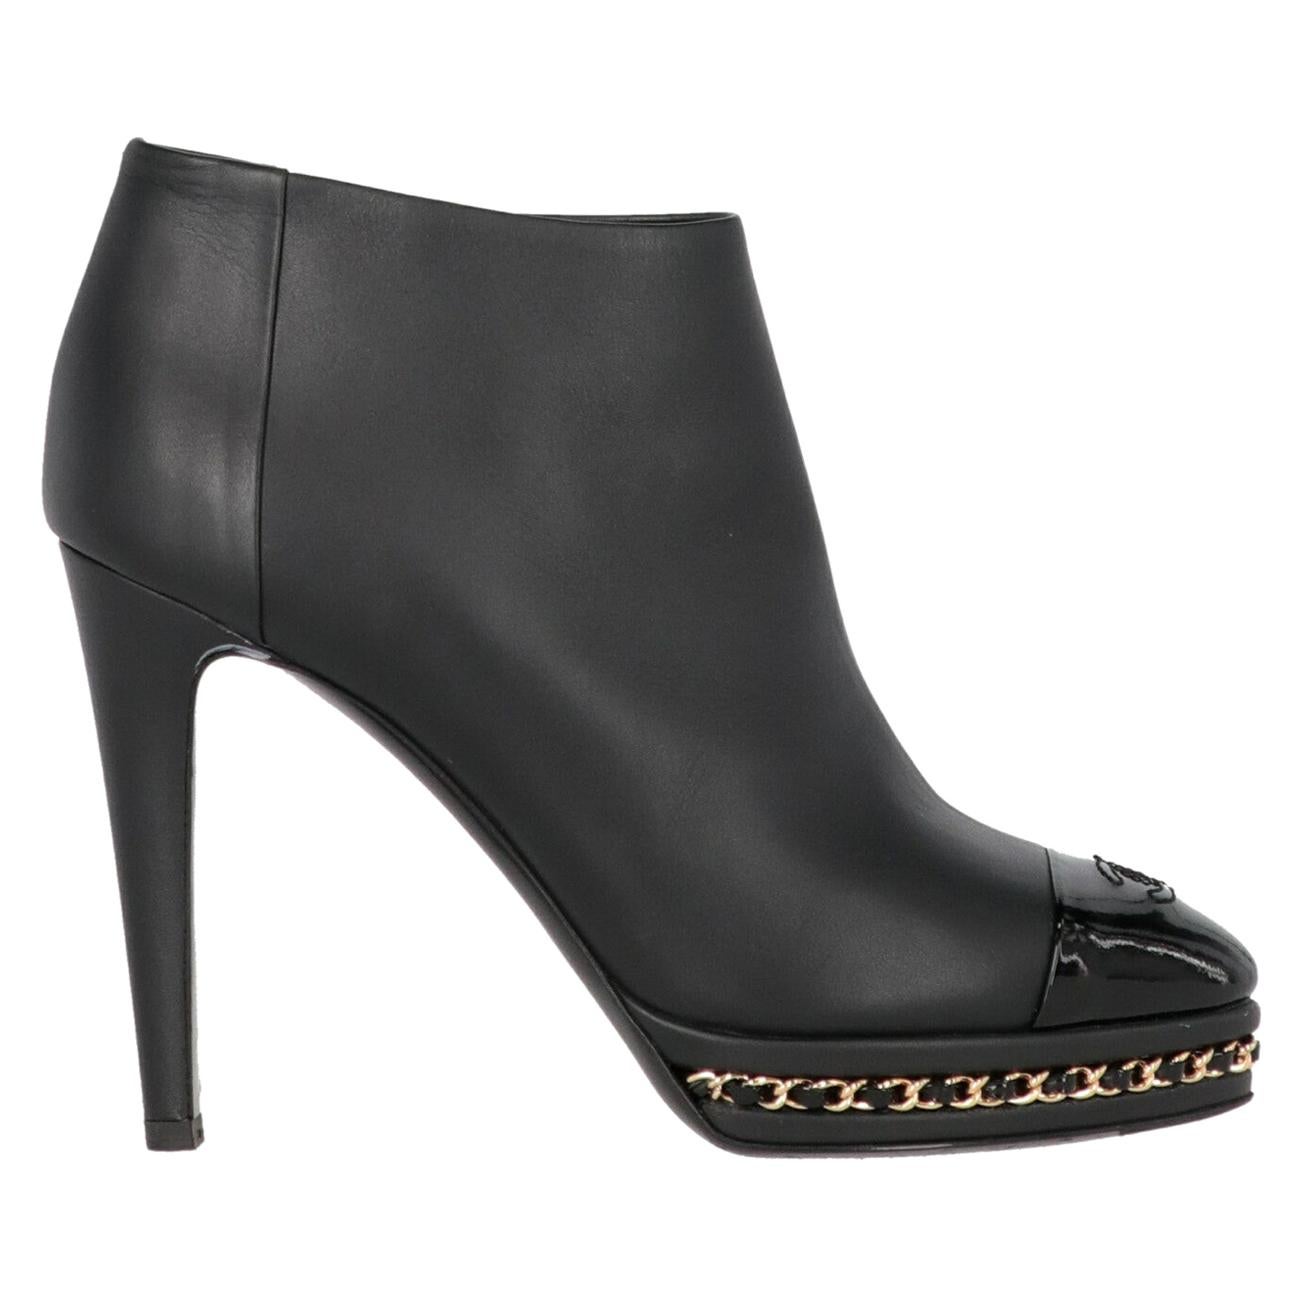 2010s Chanel Black Leather Ankle Boots